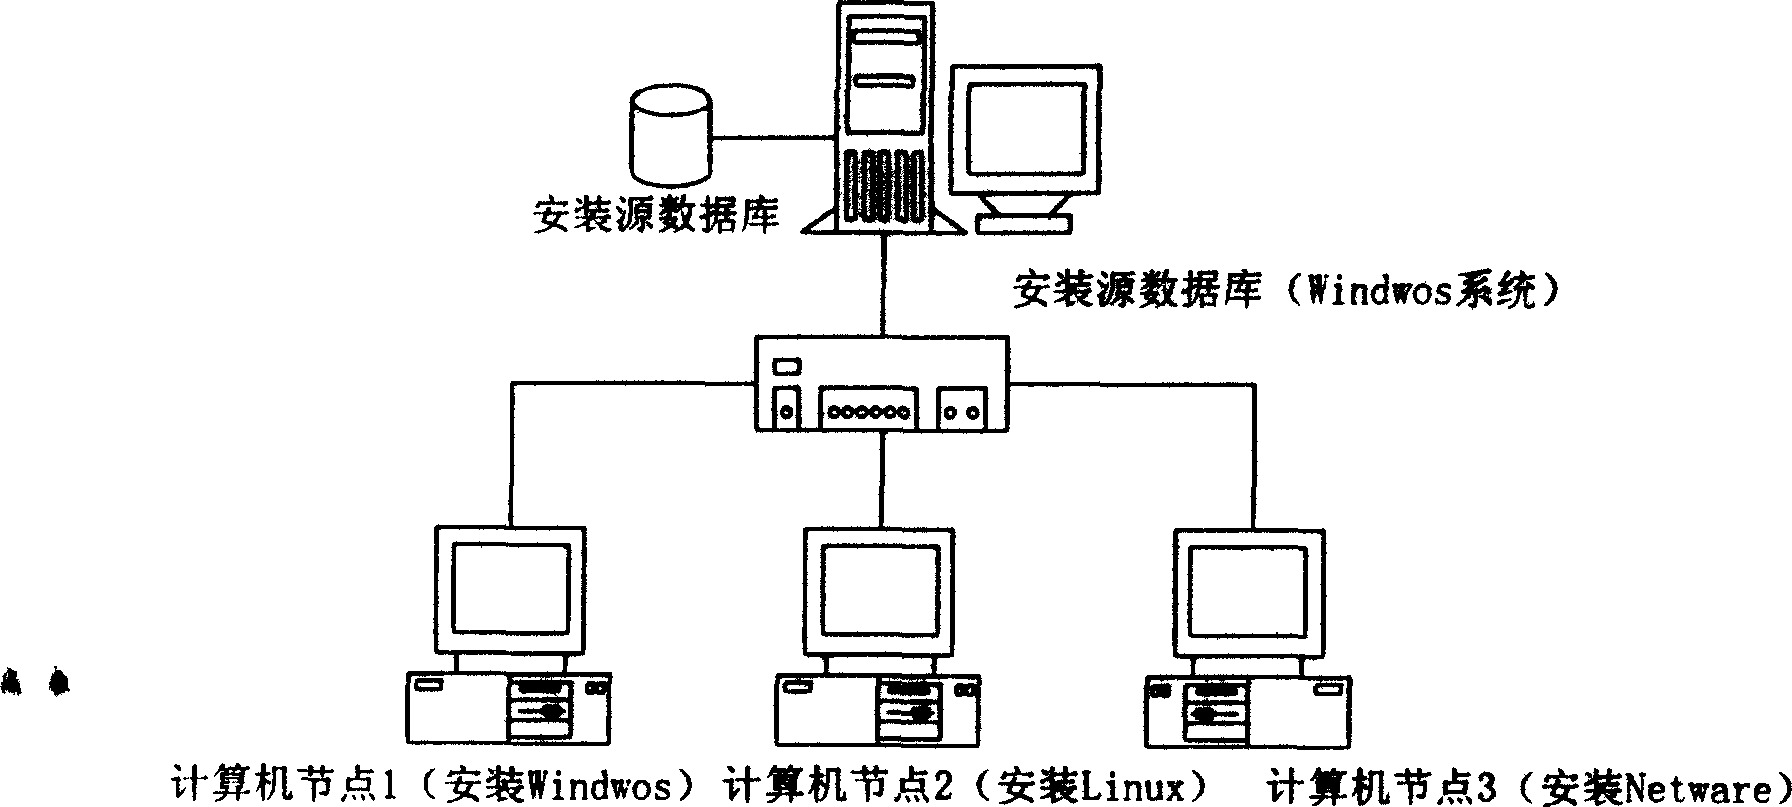 Method of remote parallel automatic installation of multiple types of operating systems via network